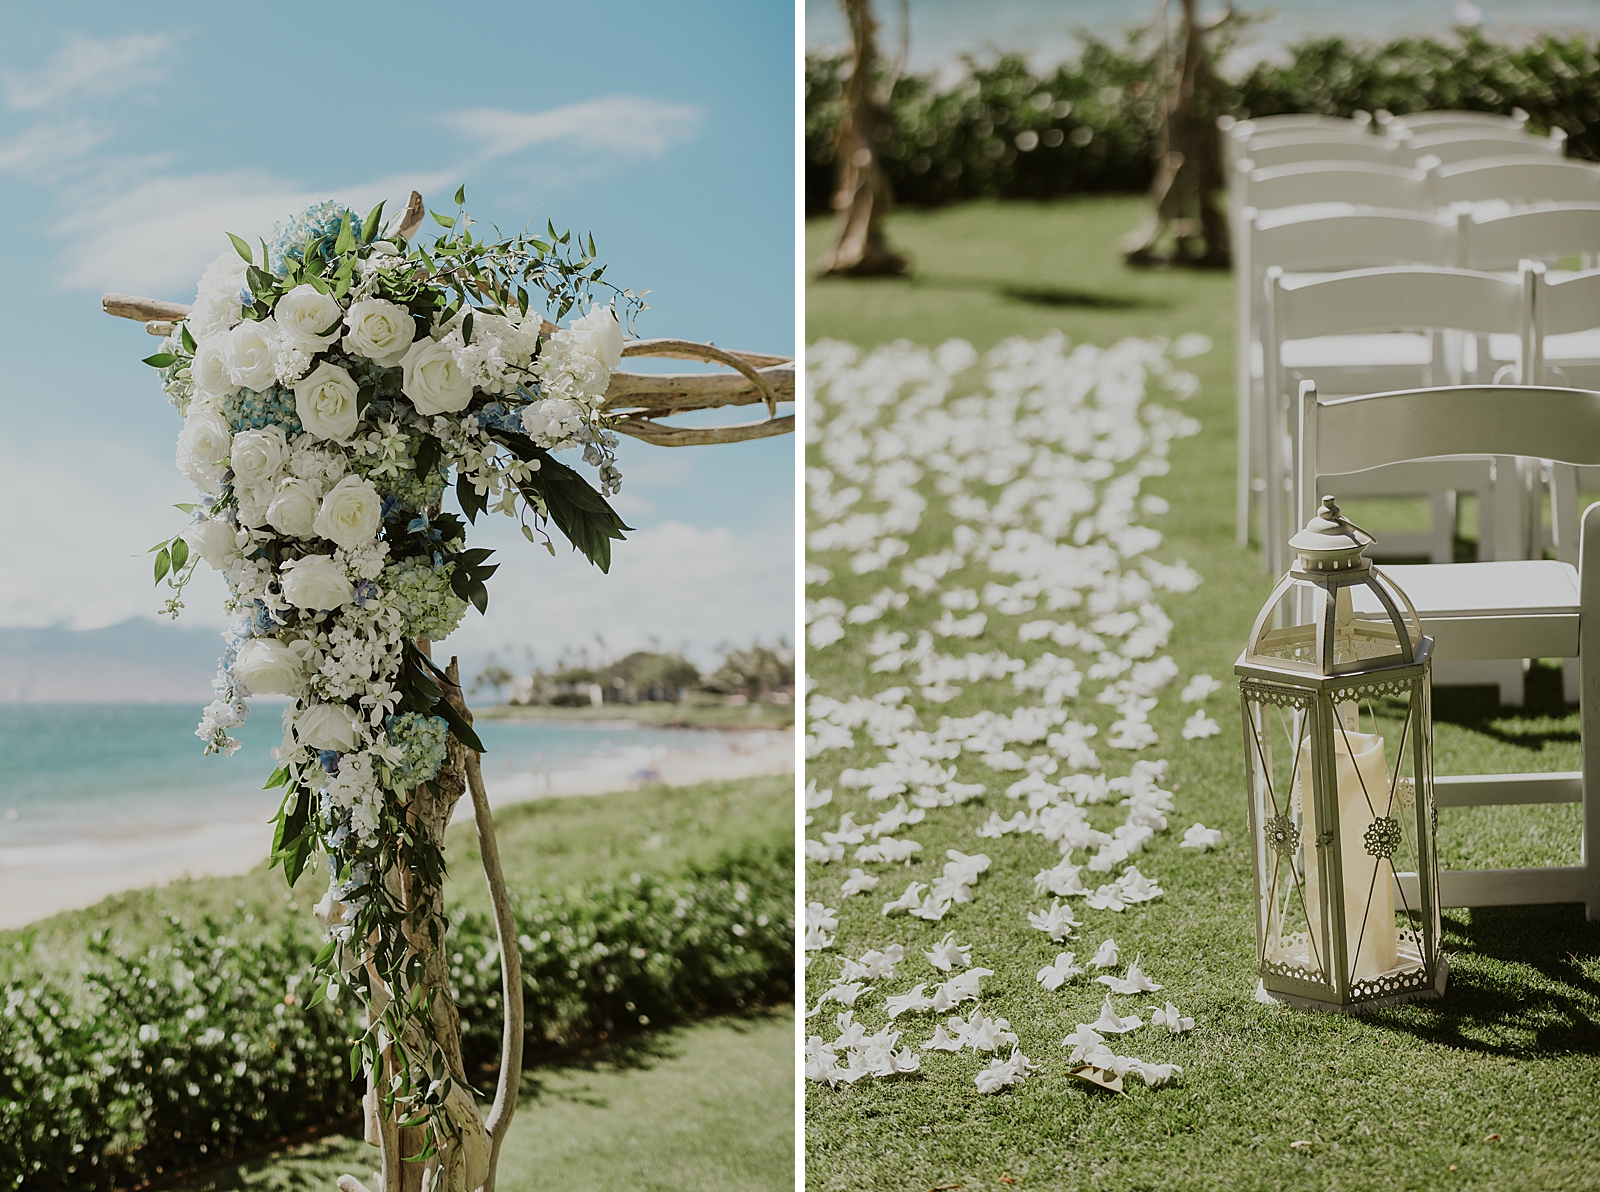 Floral decor on wooden arch and white folding chairs